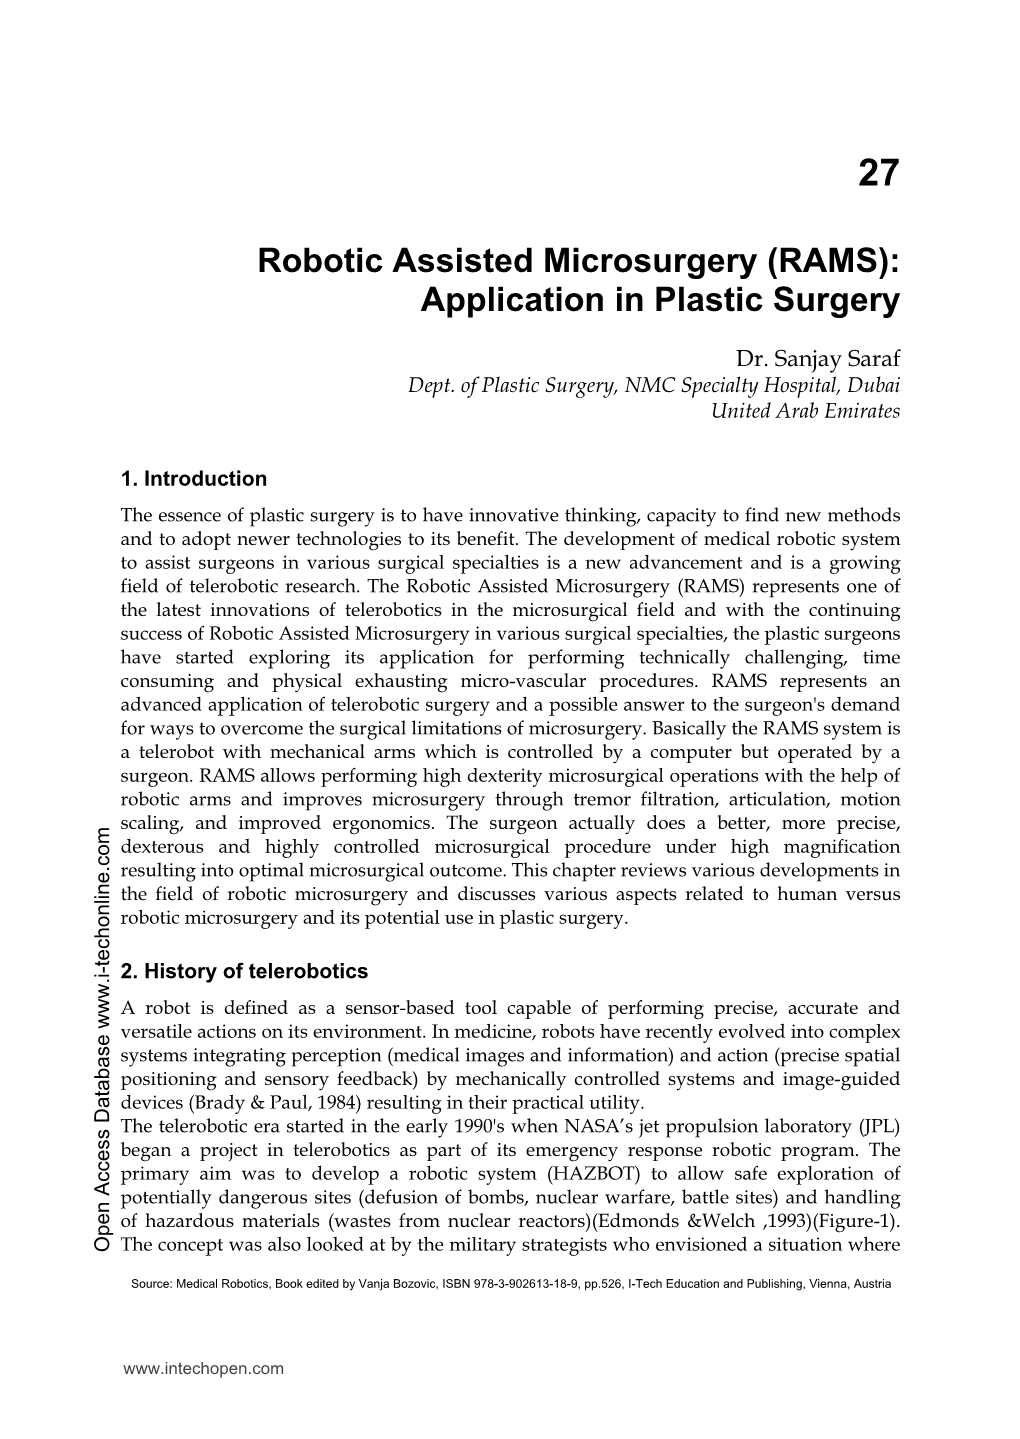 Robotic Assisted Microsurgery (RAMS): Application in Plastic Surgery